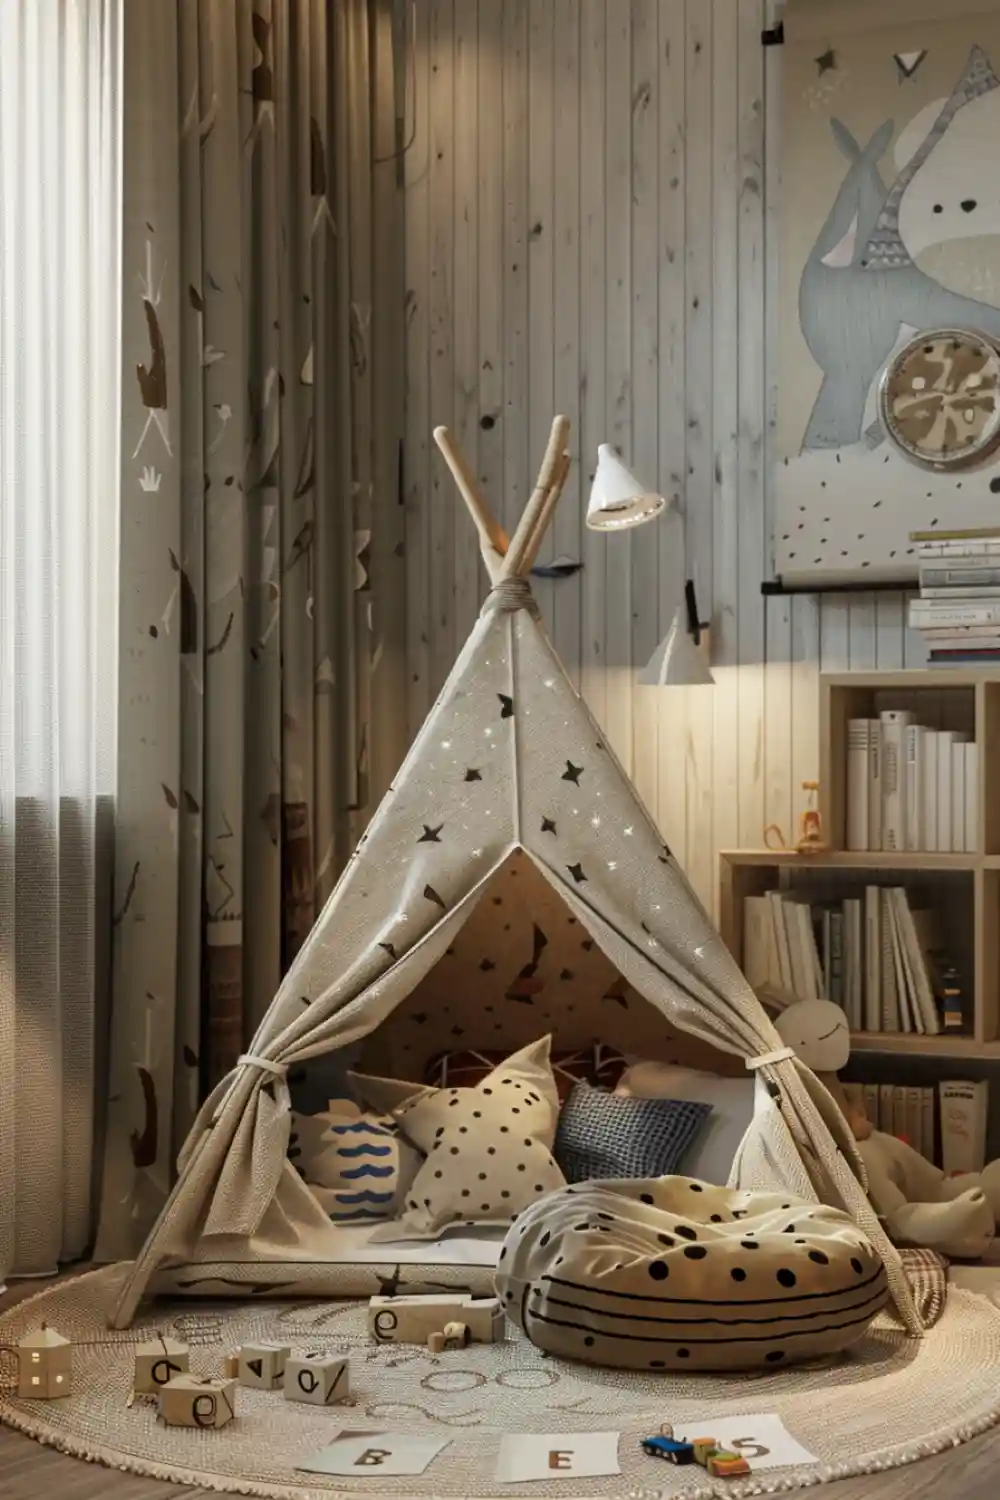 Play Tents or Teepees 4